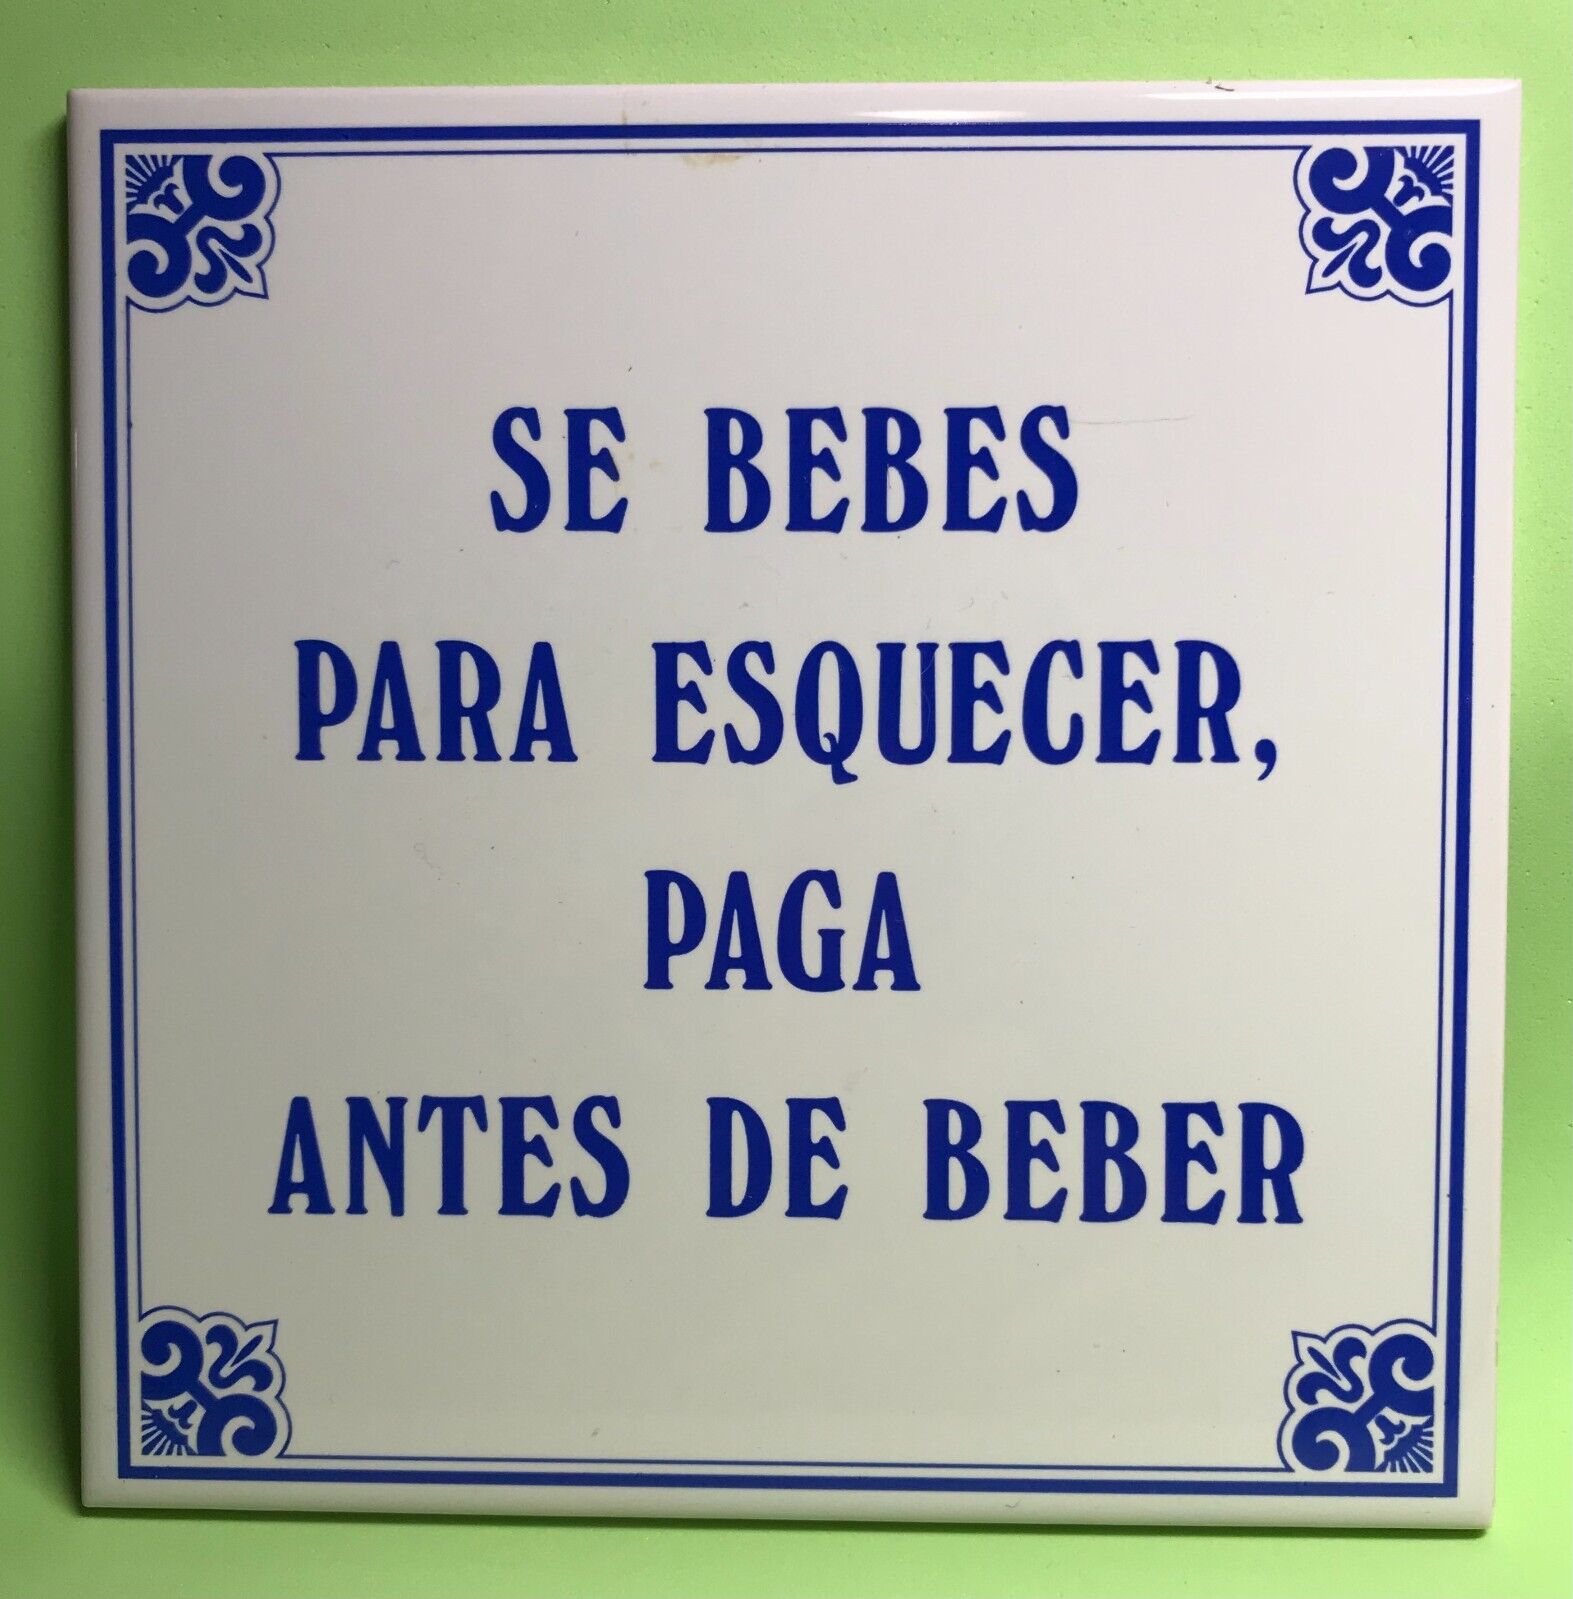 Portuguese Idiomatic Expressions Tile Ceres Coimbra Portugal Roadhouse Bar Rules